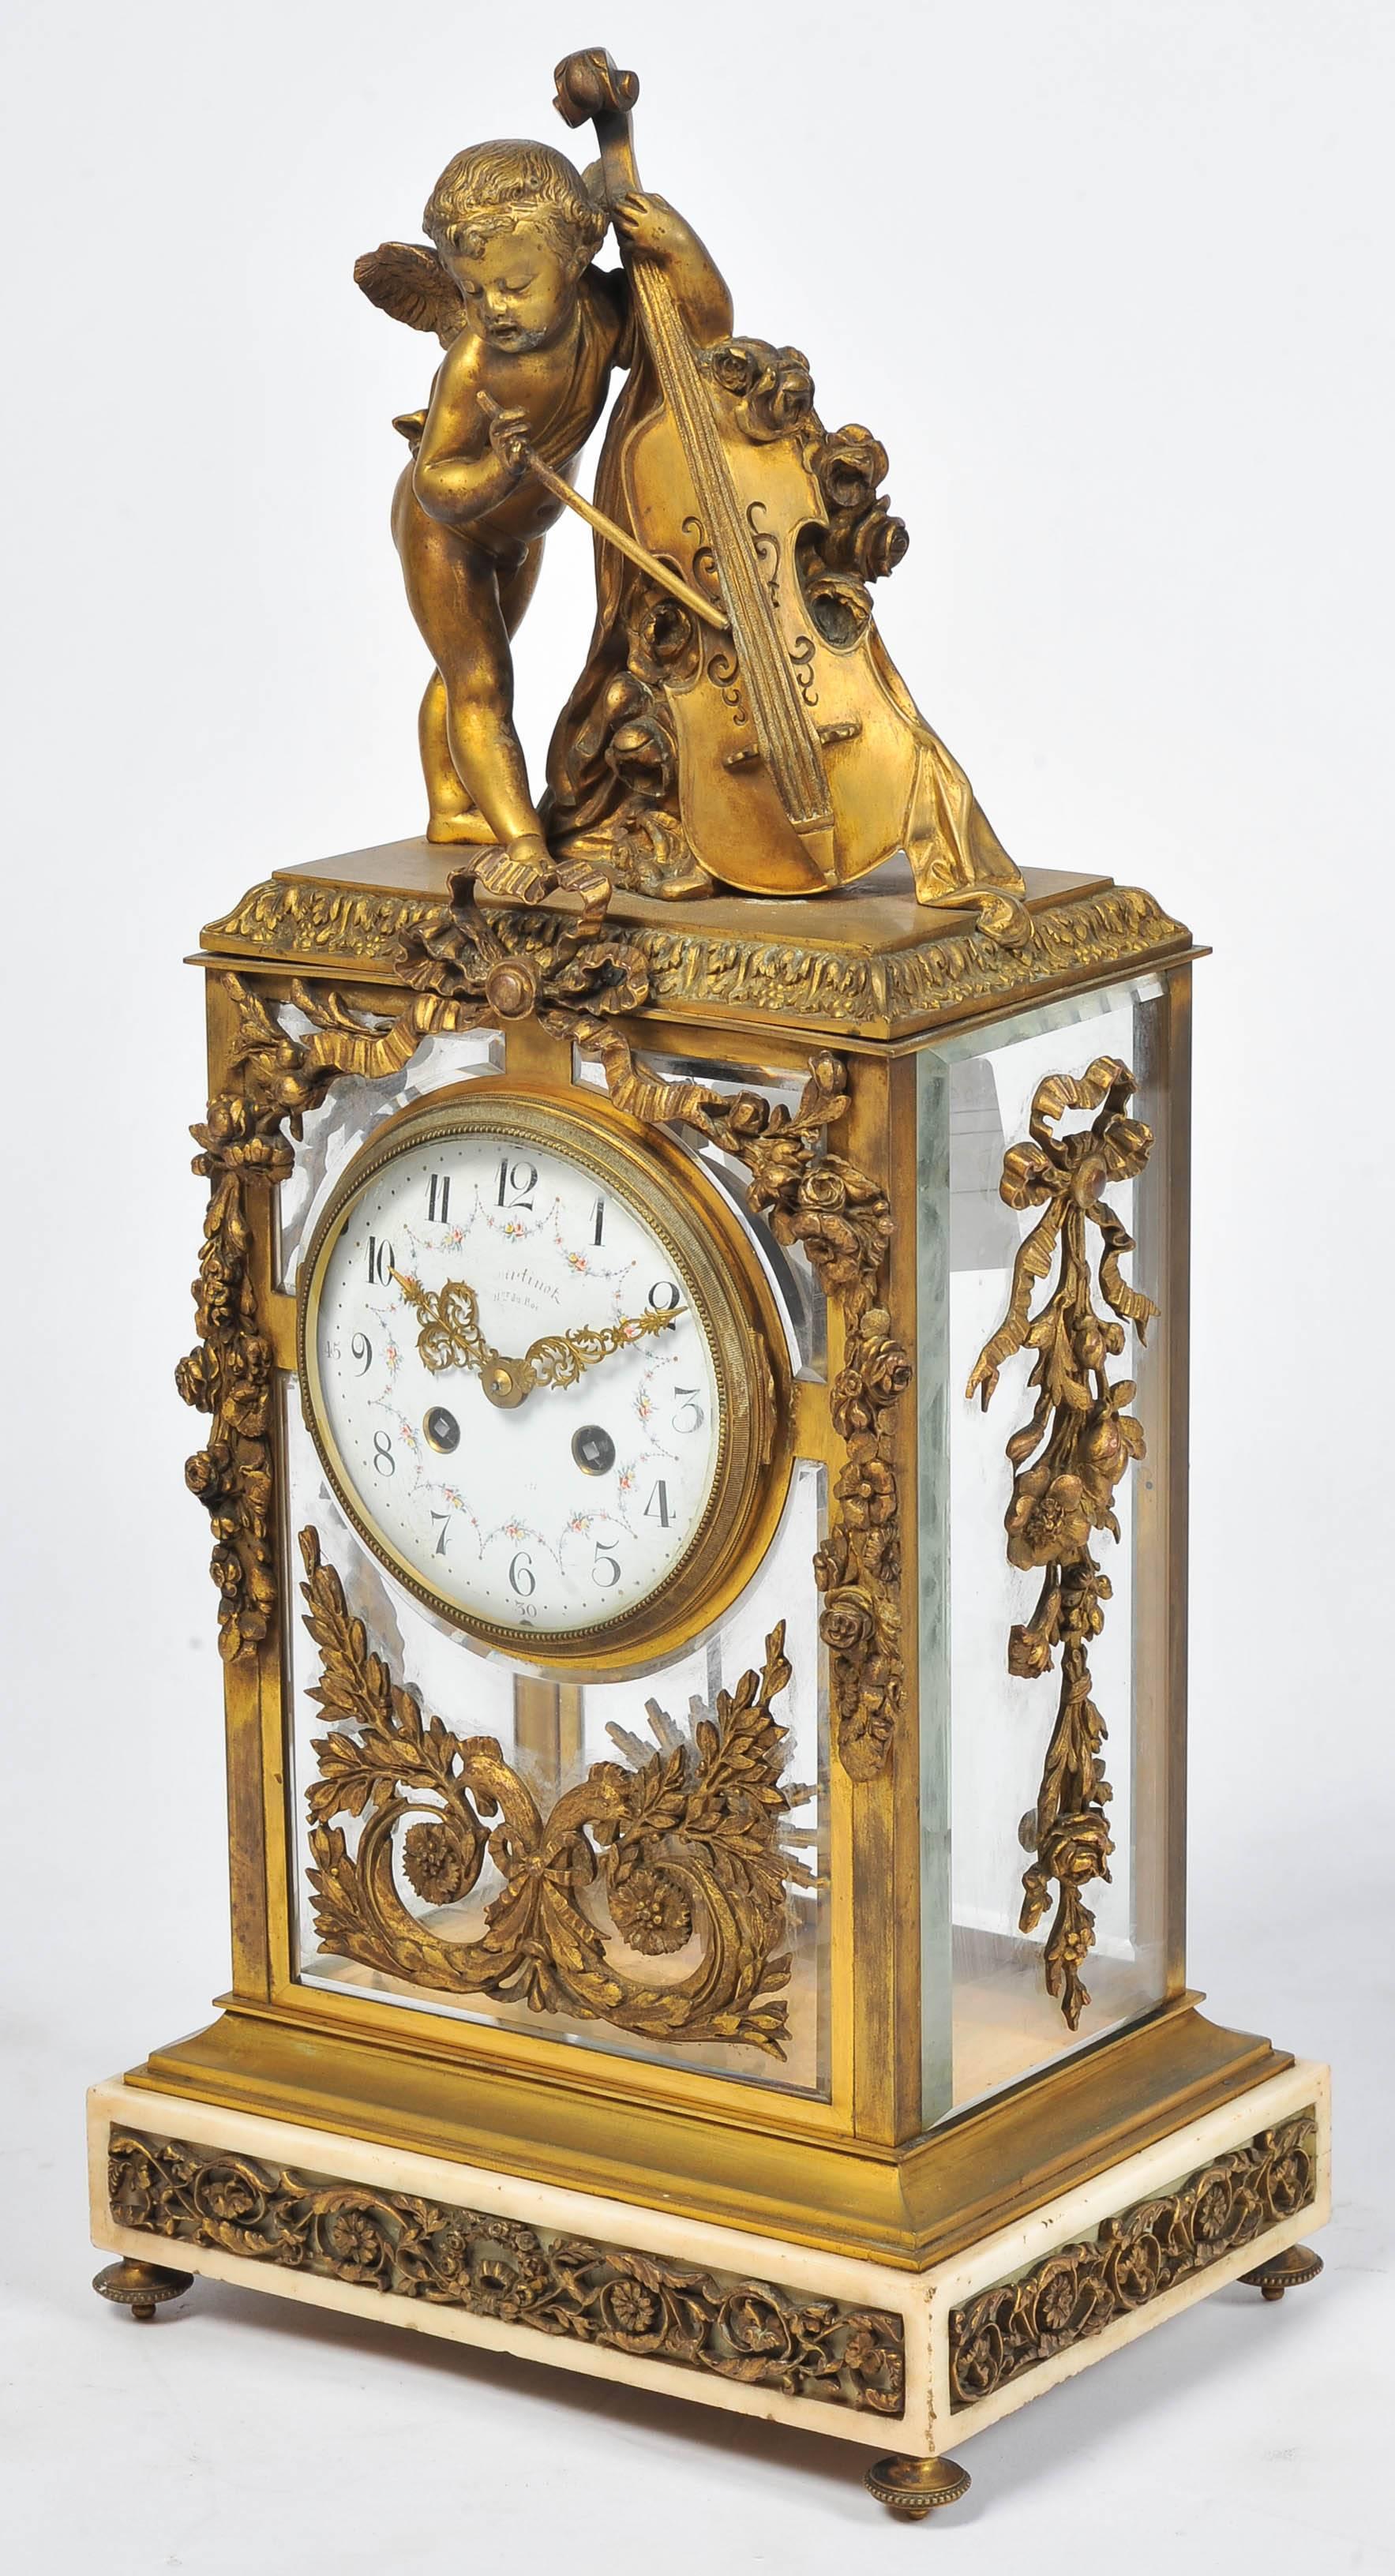 A very good quality 19th Century French gilded ormolu mantel clock. Having a cherub playing a base violin, a four glass case mounted with ormolu foliate and swag decoration, an eight day hour and half hour chiming movement, set on a white marble